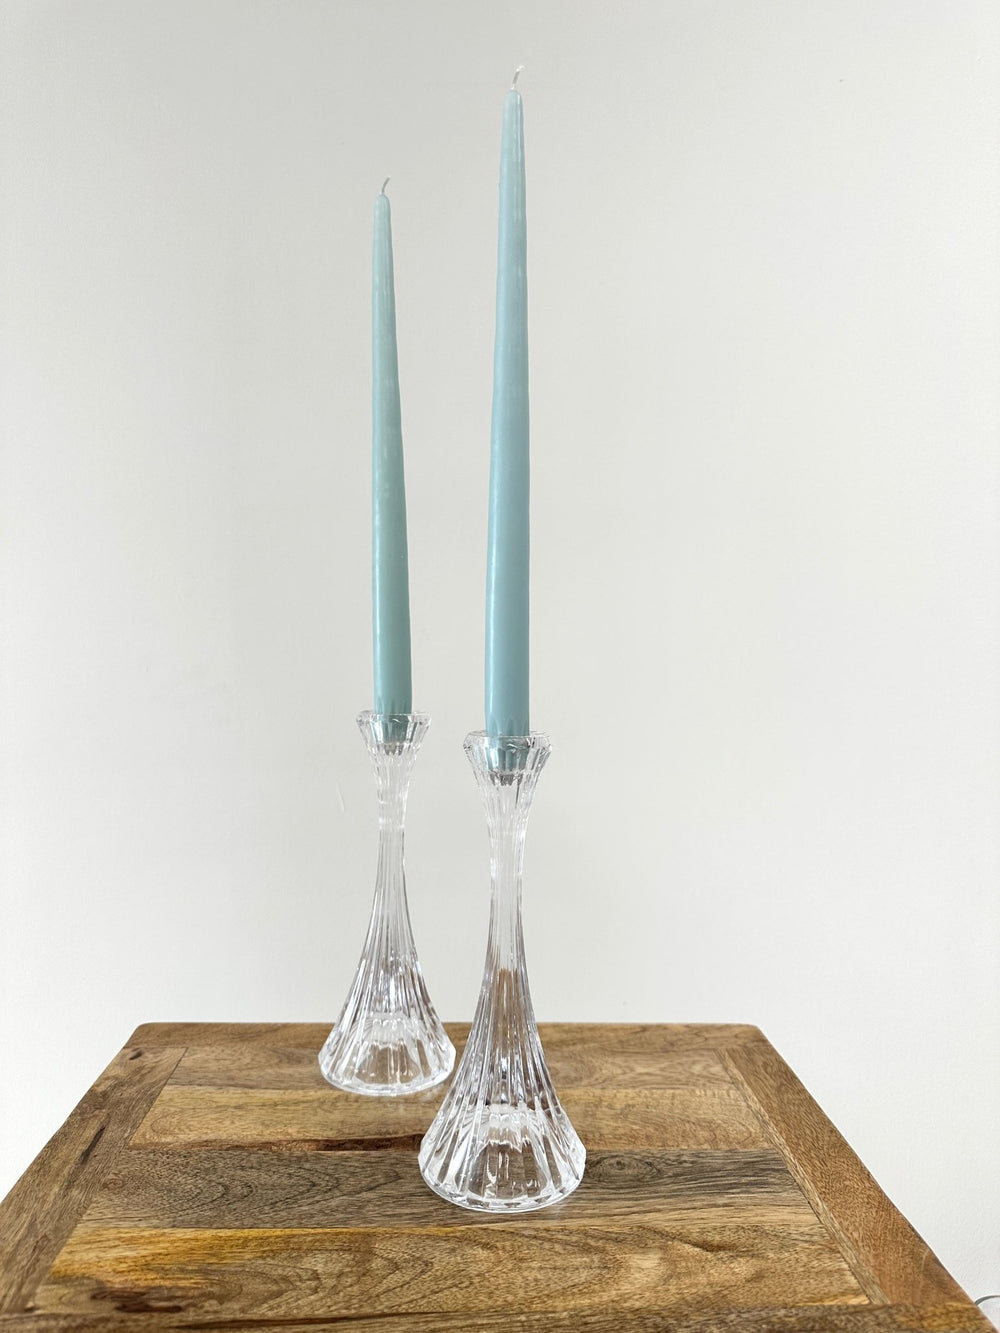 Vintage Crystal Candlesticks + Candles - Pretty by Her- handmade locally in Cambridge, Ontario